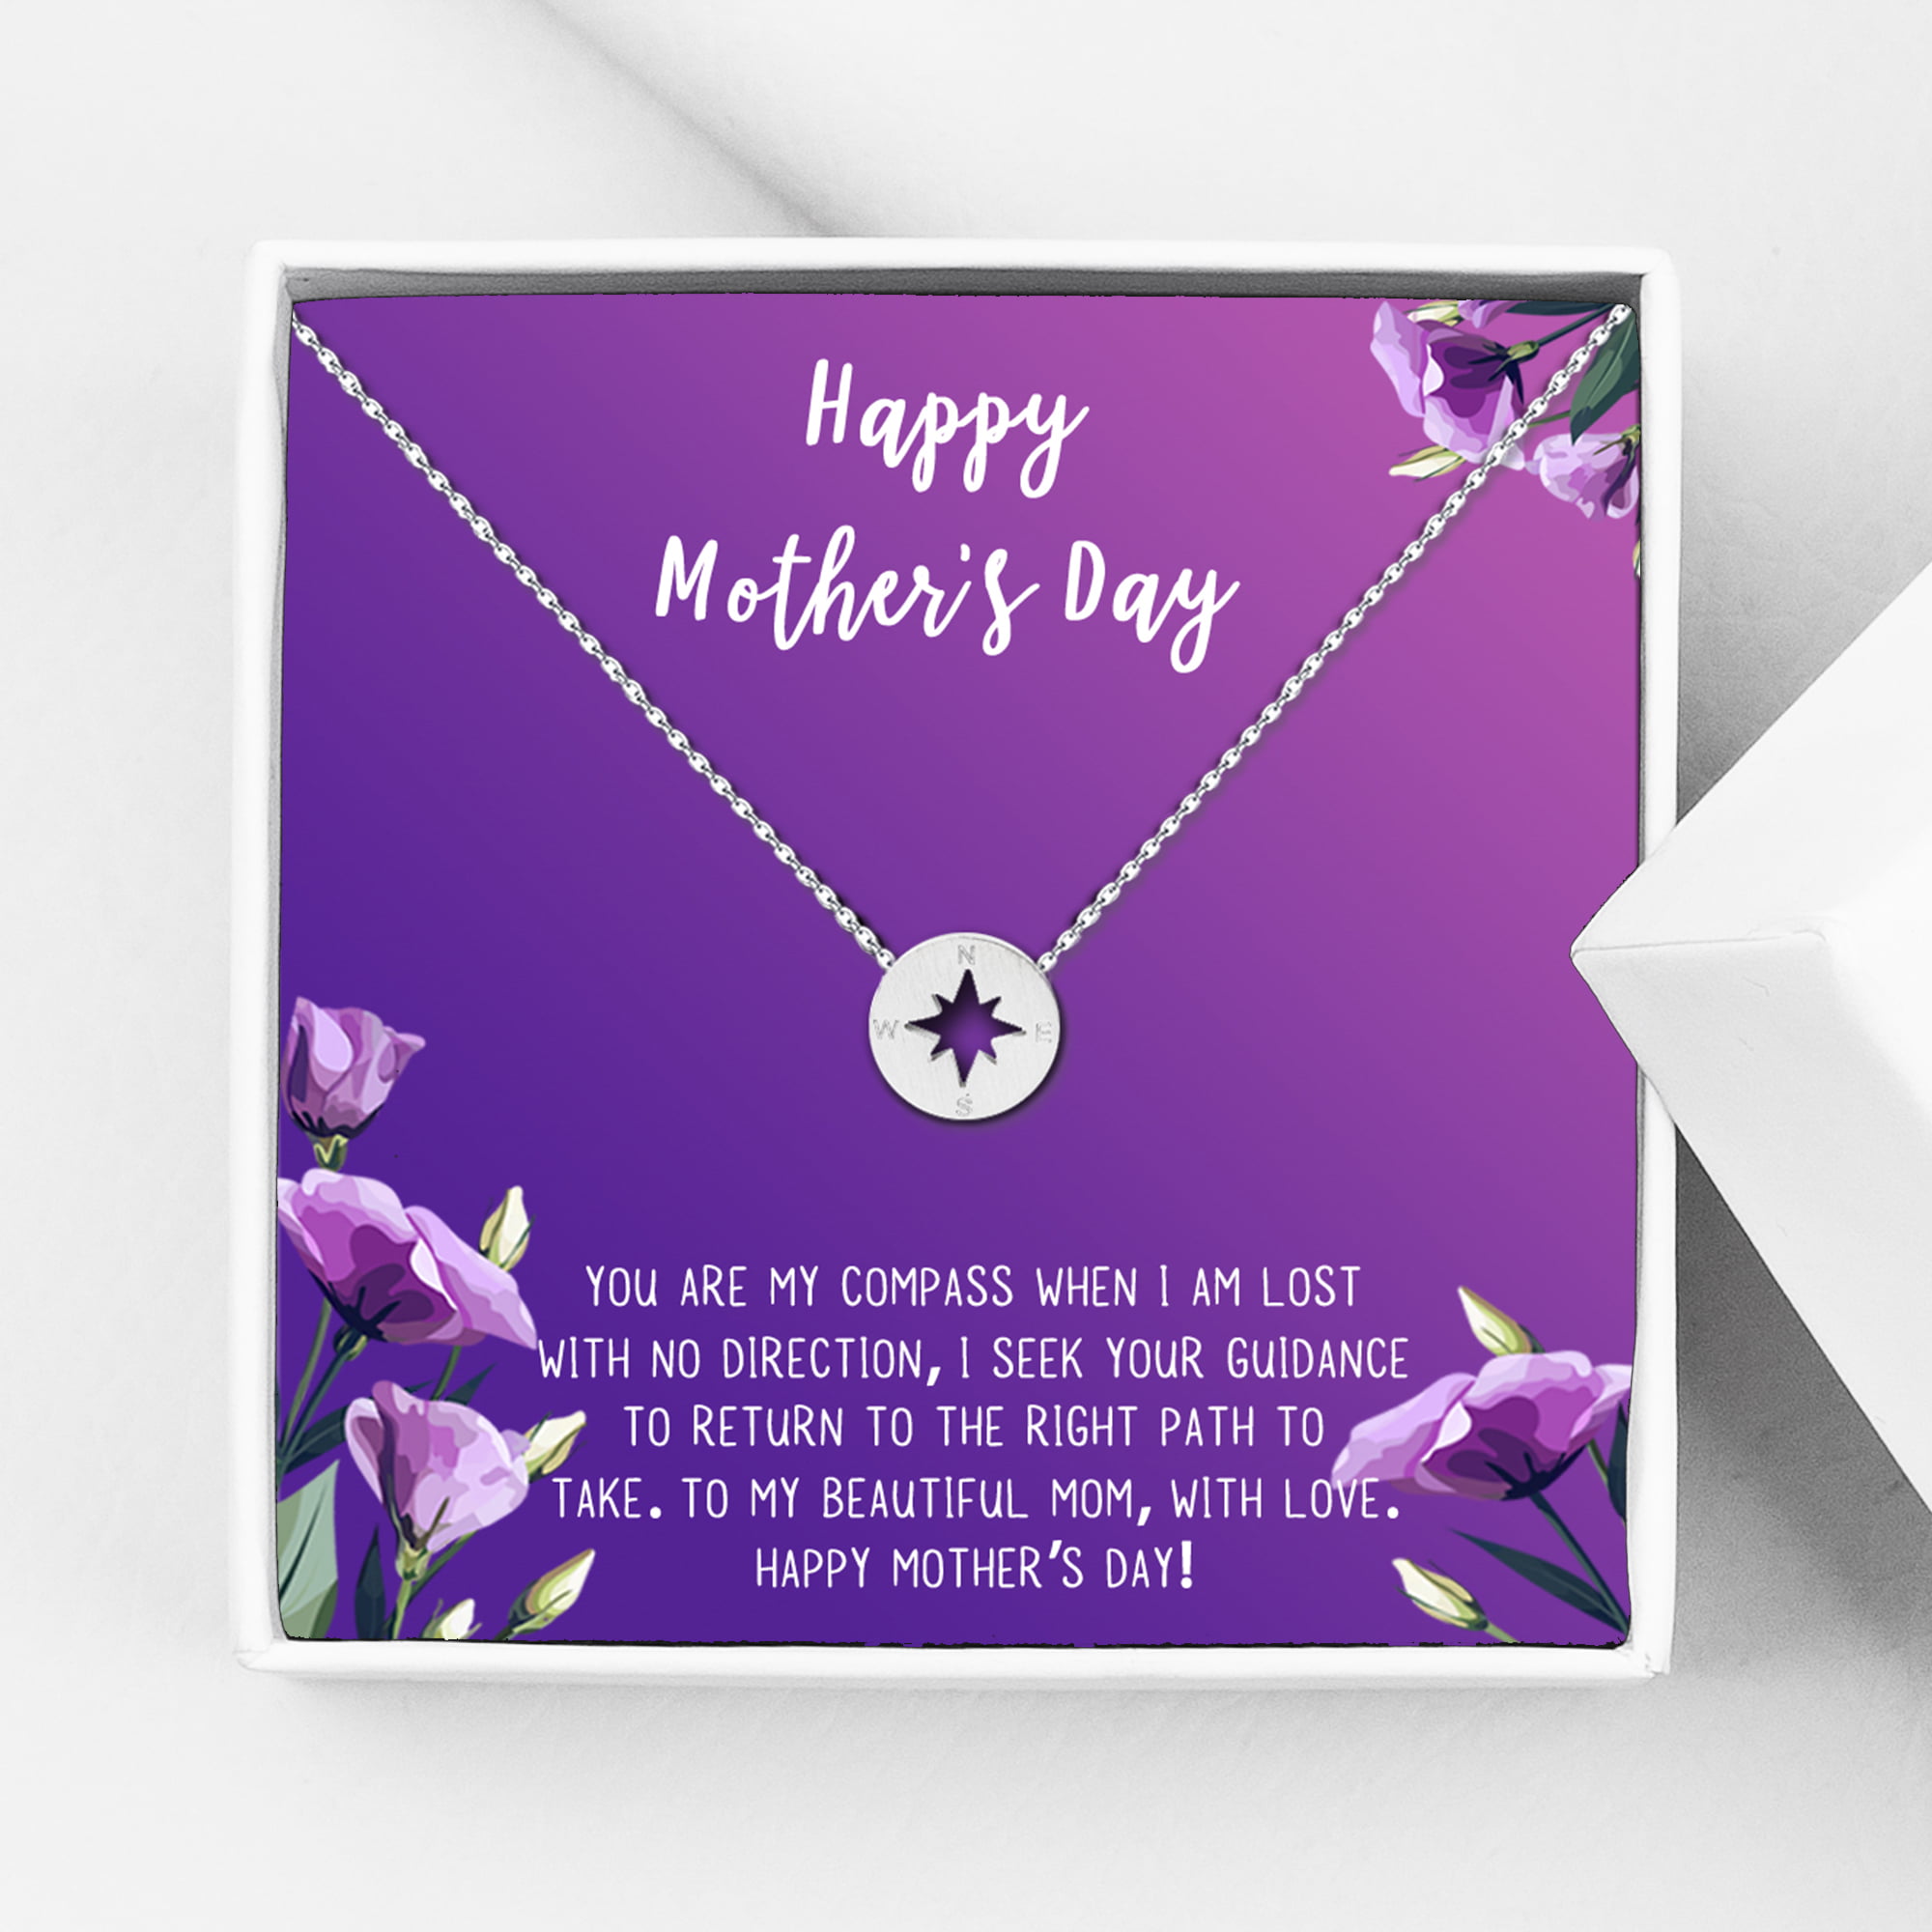 Necklace Gift for Mum. Personalized Gifts for Mother's Day from Daughter or Son Custom Jewellery Box To my beautiful Mom